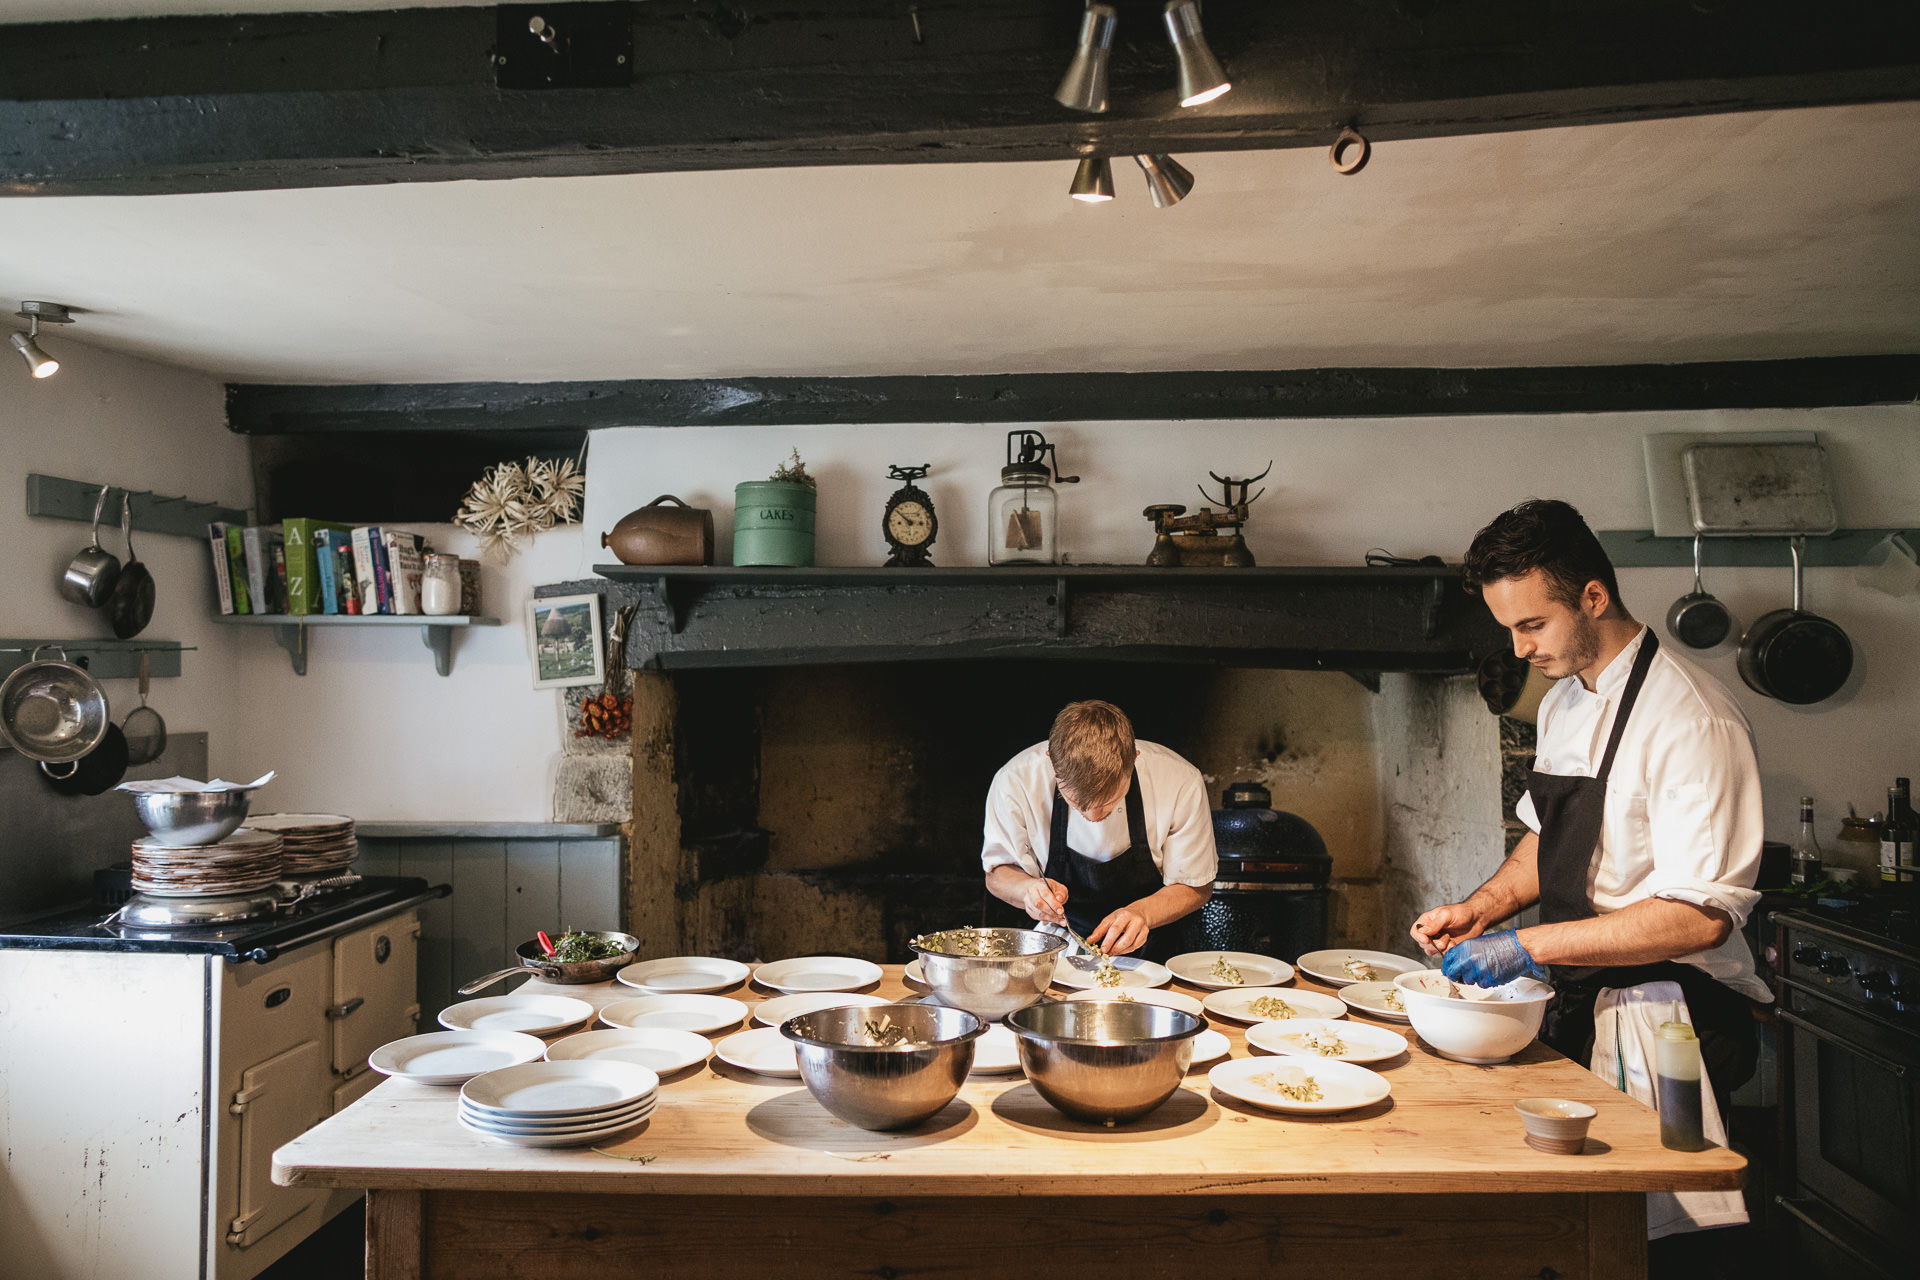 River Cottage chefs plating up food in the farmhouse